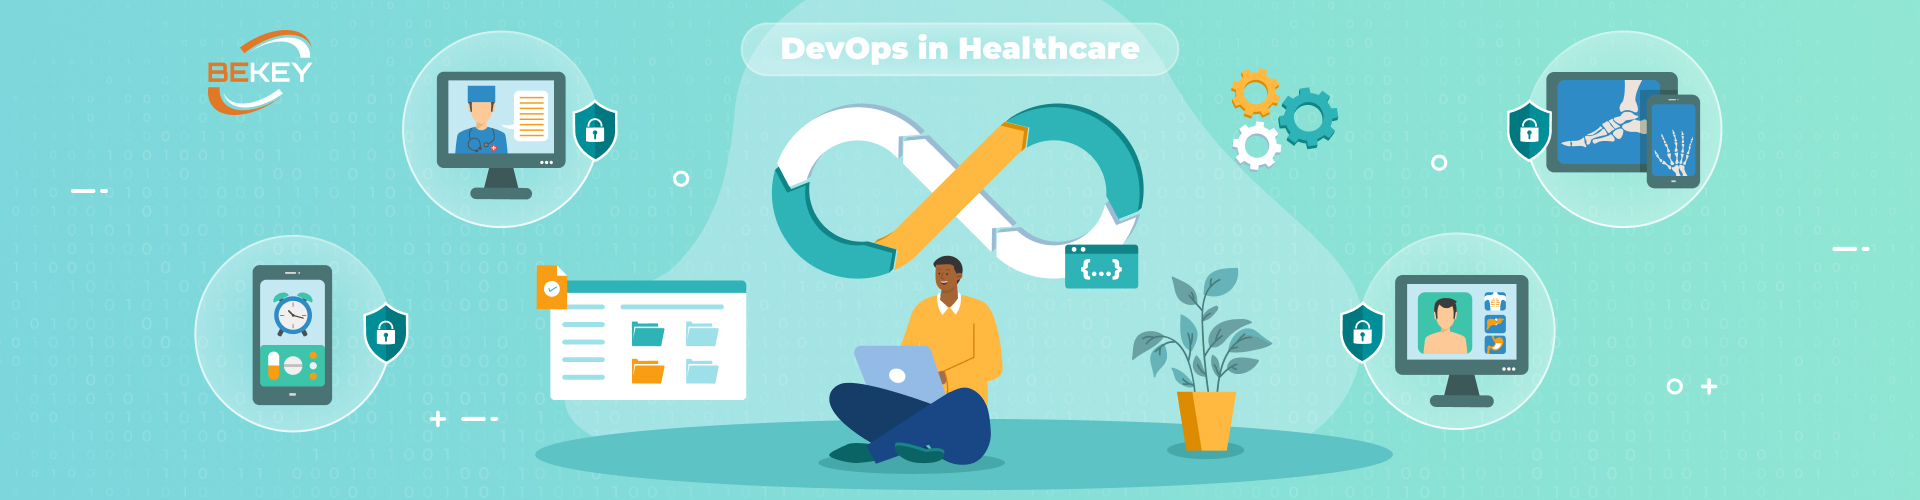 What Role does DevOps Play in Building Digital Health Solutions? - image